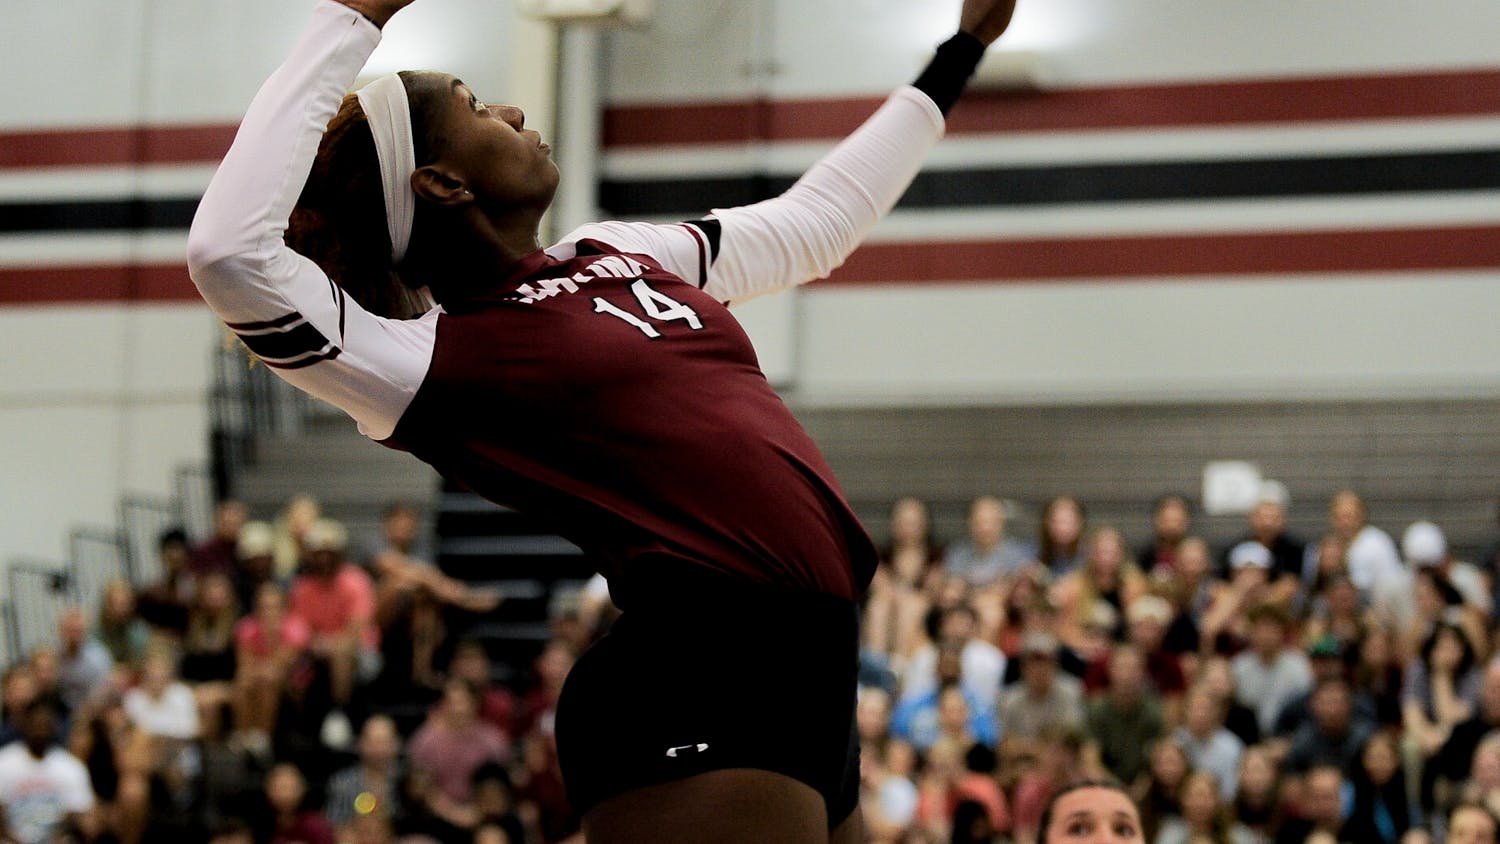 The South Carolina volleyball team started its 2022 campaign strong, winning all three of its matches in the Carolina Classic. The team dominated the weekend, losing only one set across all three games.&nbsp;